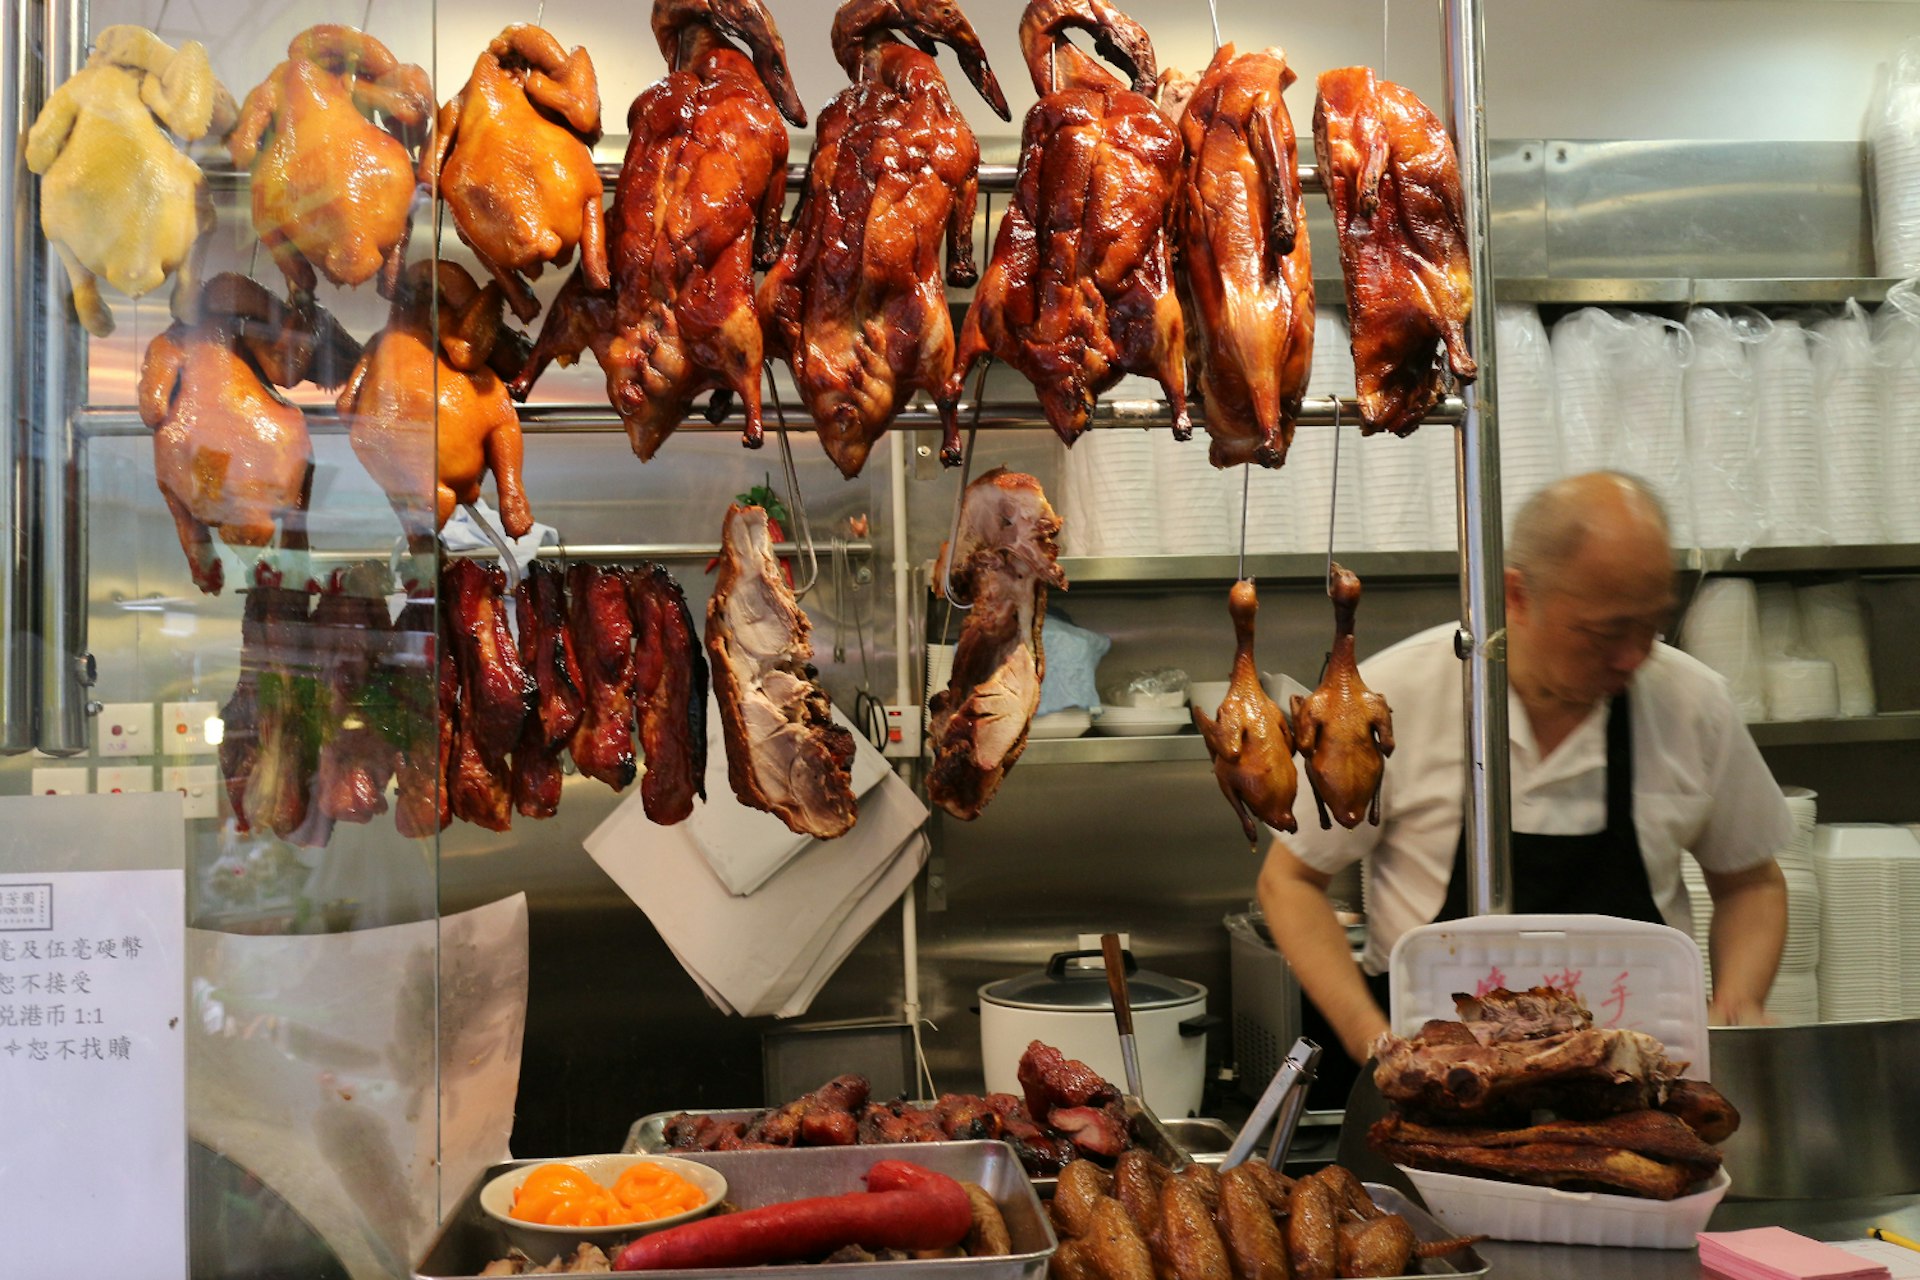 Not just window-dressing: Hong Kong-style barbecue beckons. Image by Piera Chen / Lonely Planet